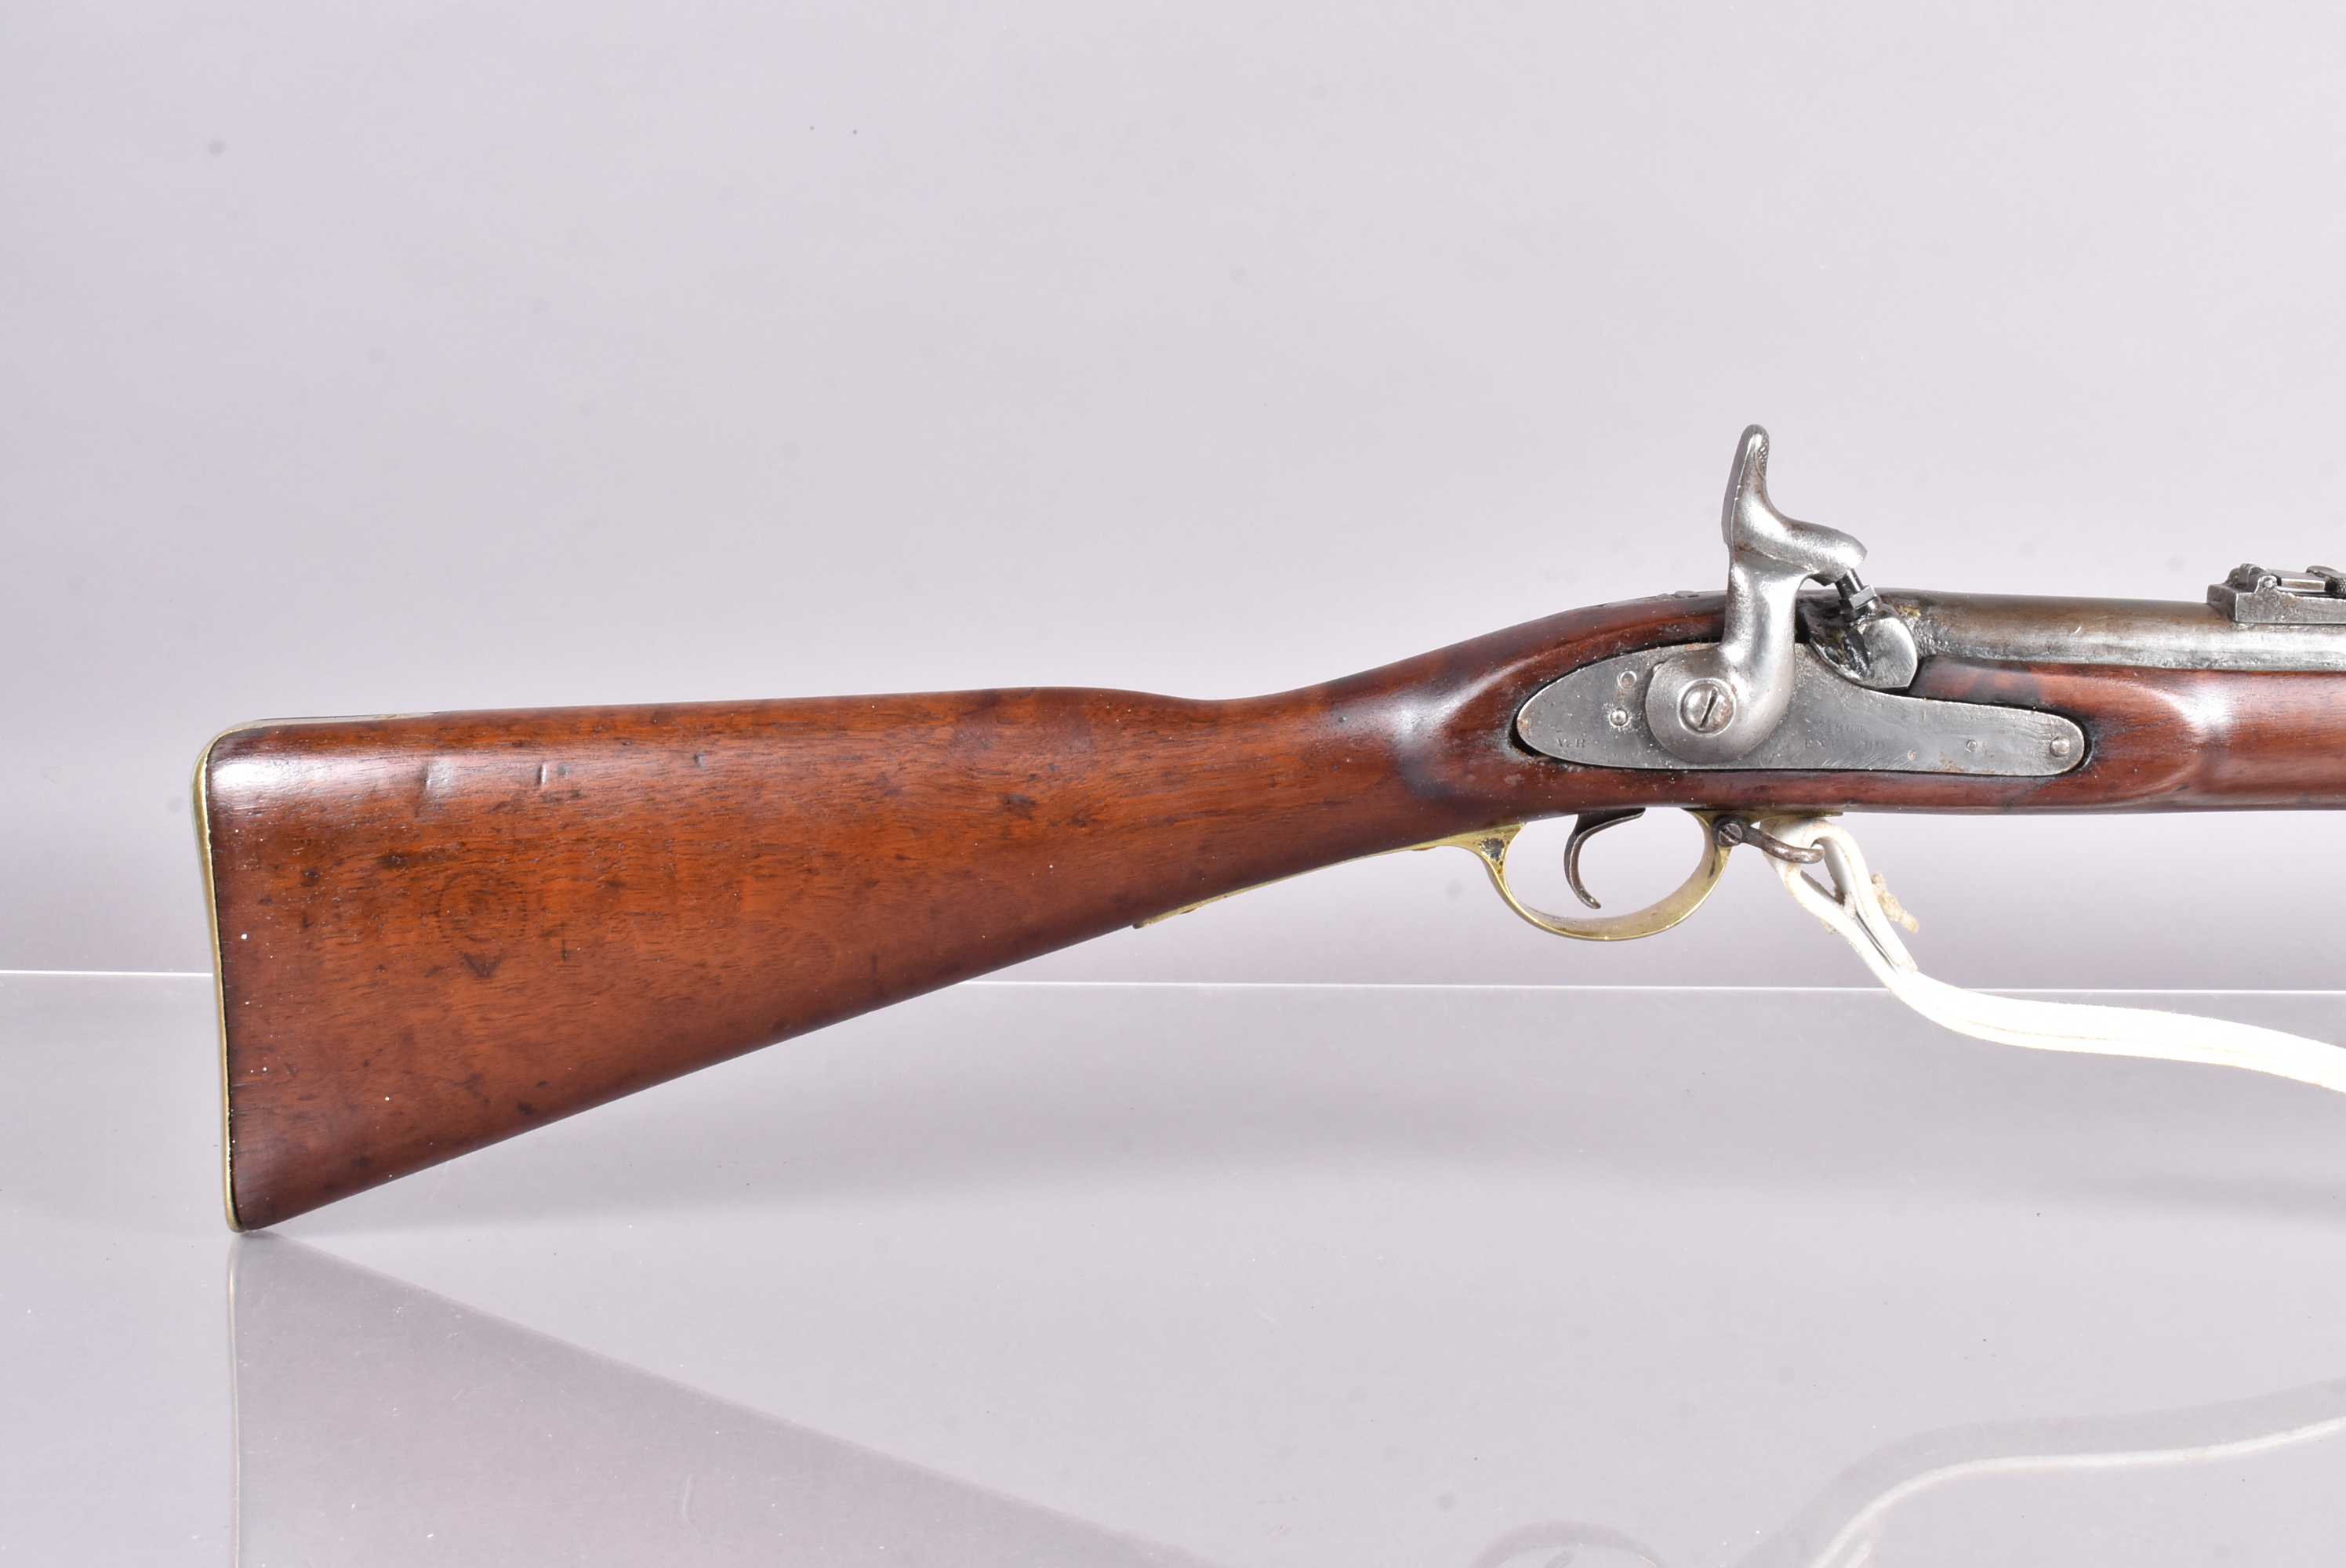 A Victorian Enfield Percussion Cap musket, dated 1864, stamped VR to the lock plate, three band